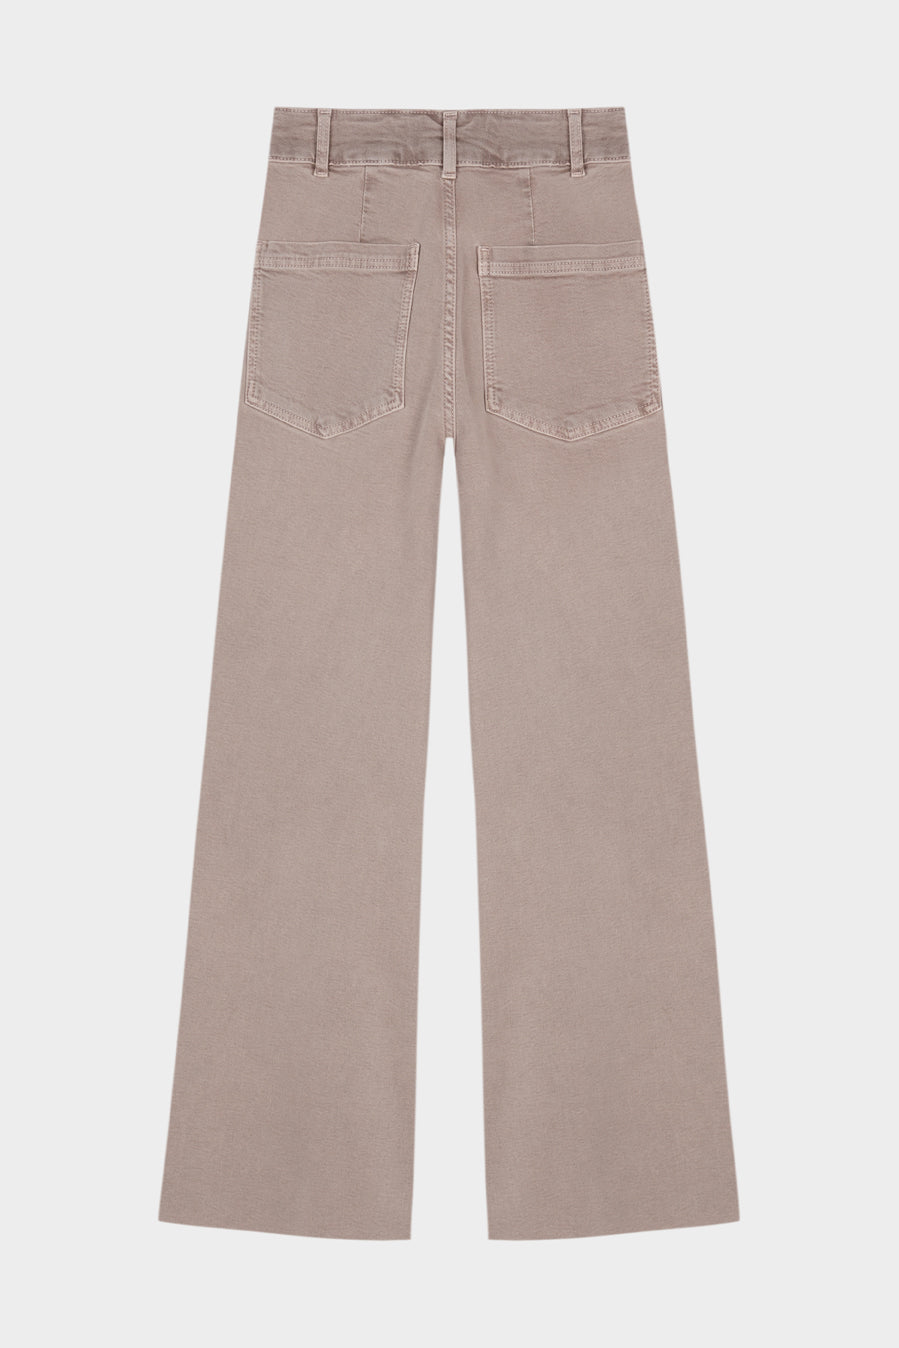 jeans taupe